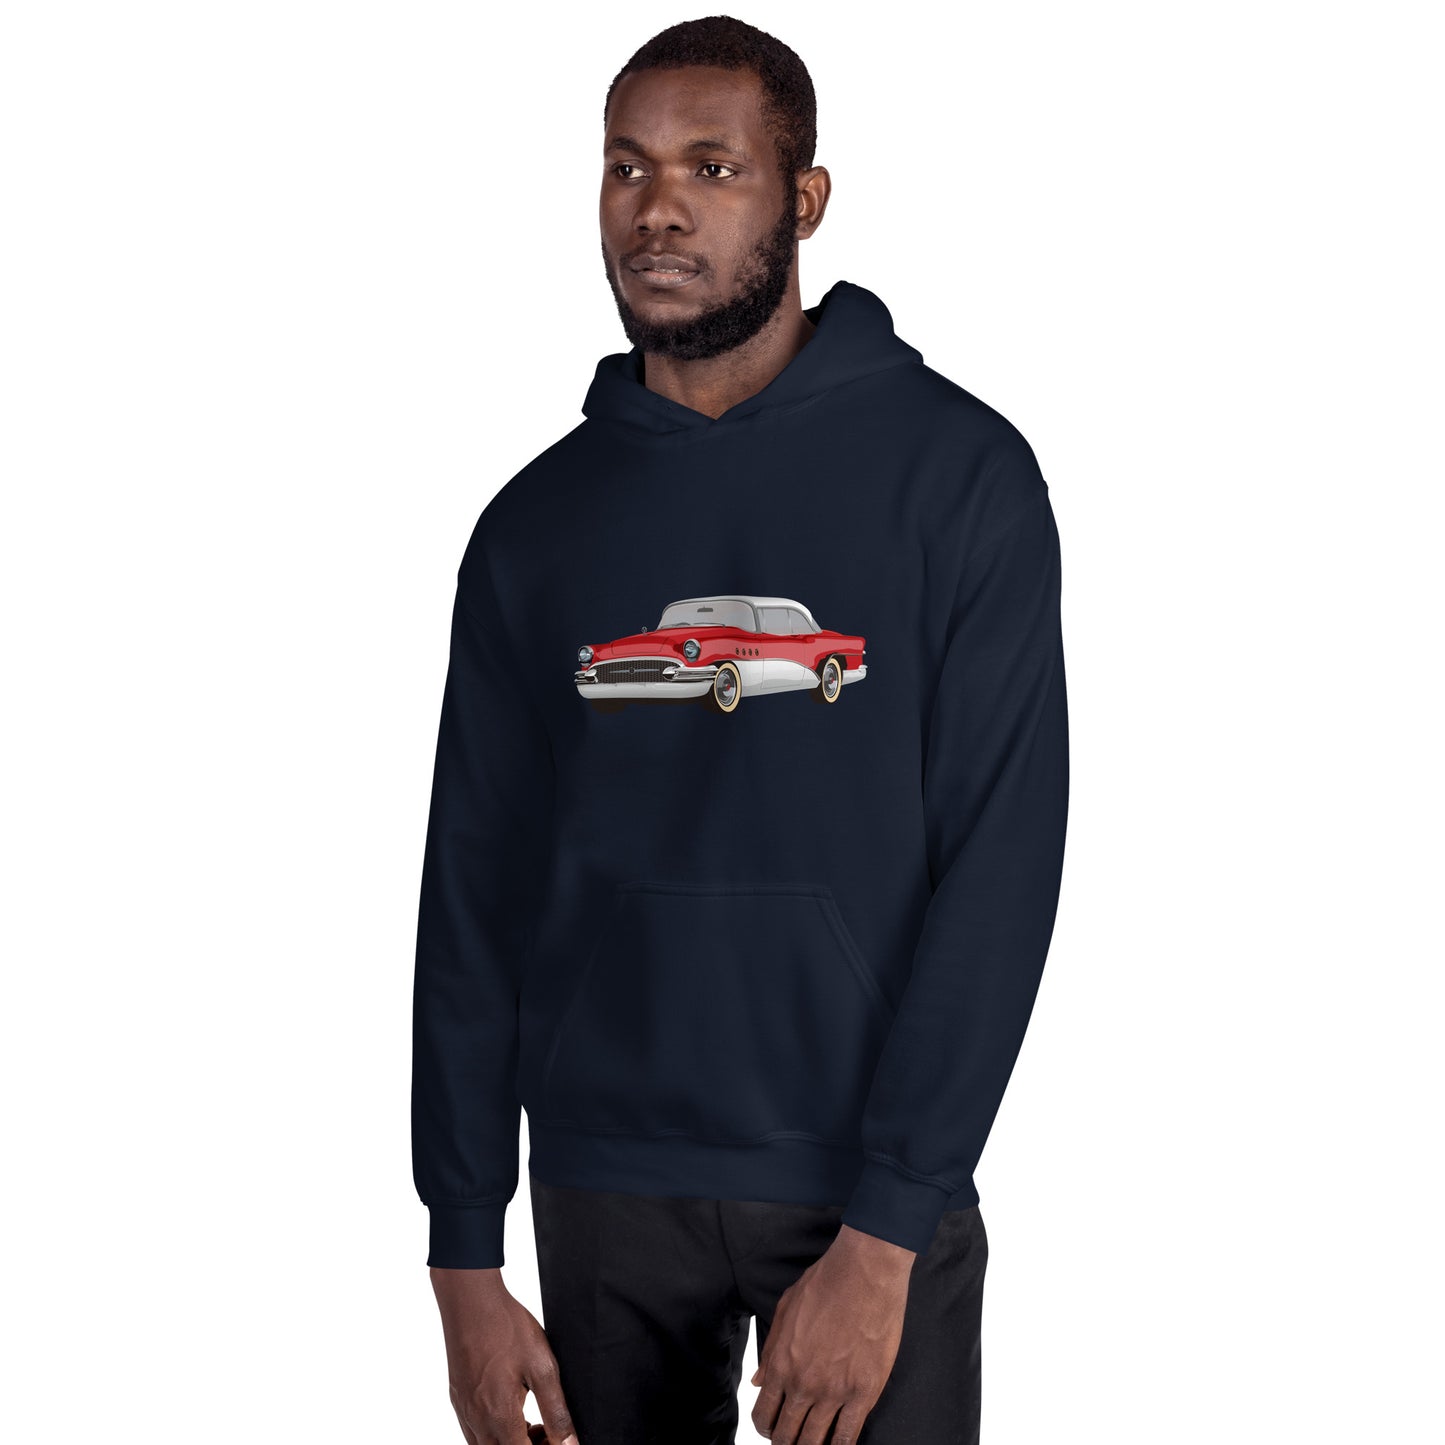 Man with navy hoodie with red chevrolet